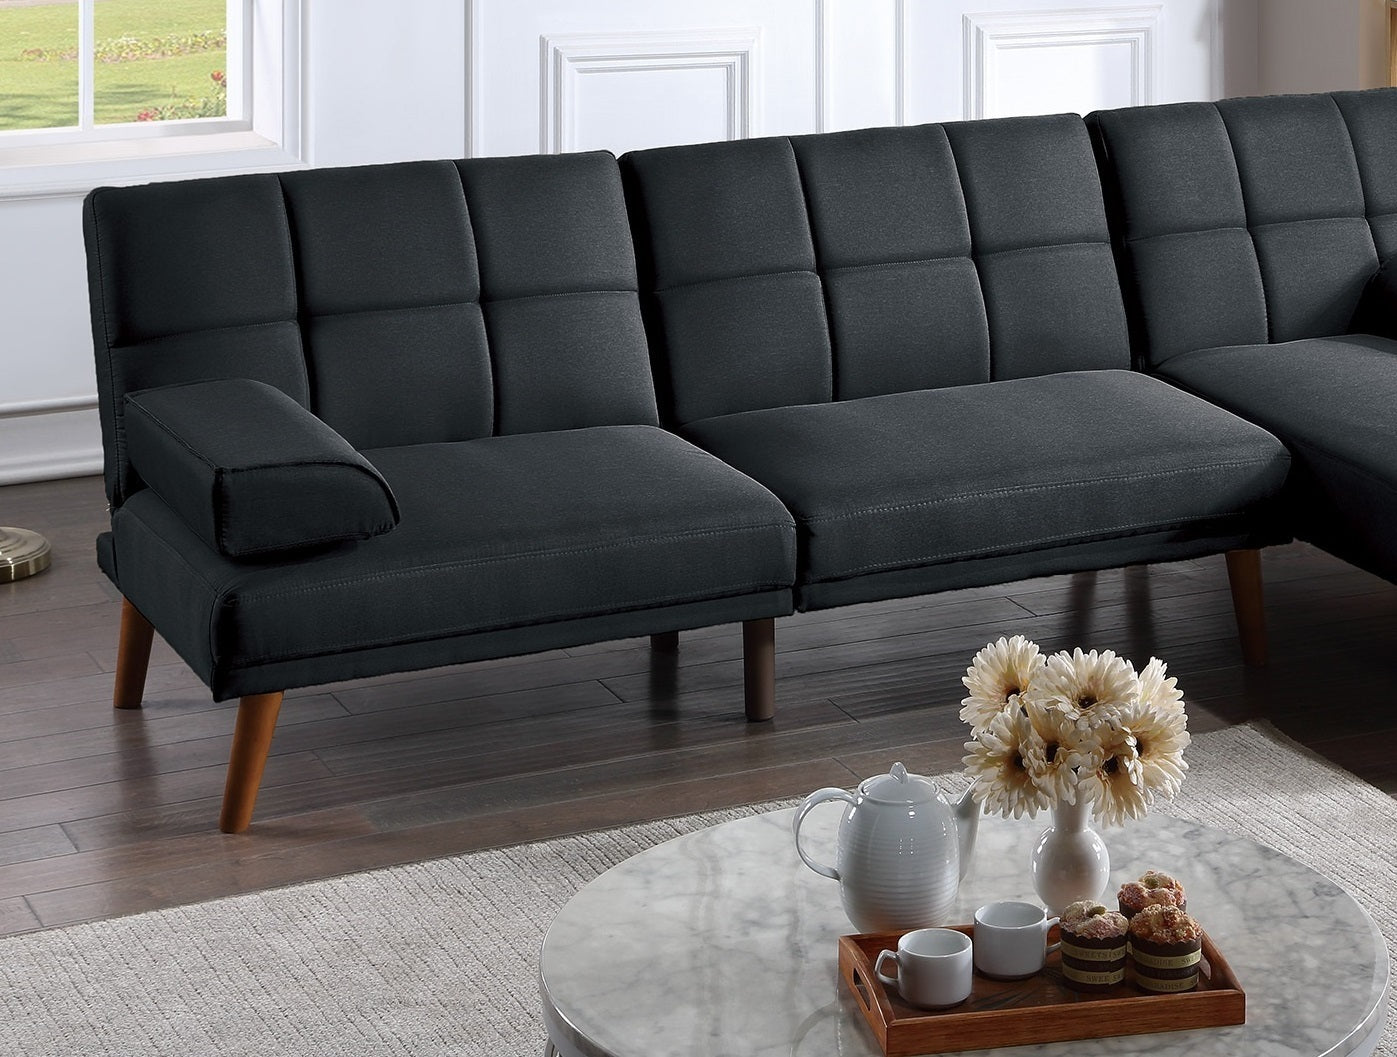 Black Polyfiber 2-Piece Sectional Sofa Set w/ Adjustable Chaise & Tufted Cushions-Stationary Sectionals-American Furniture Outlet